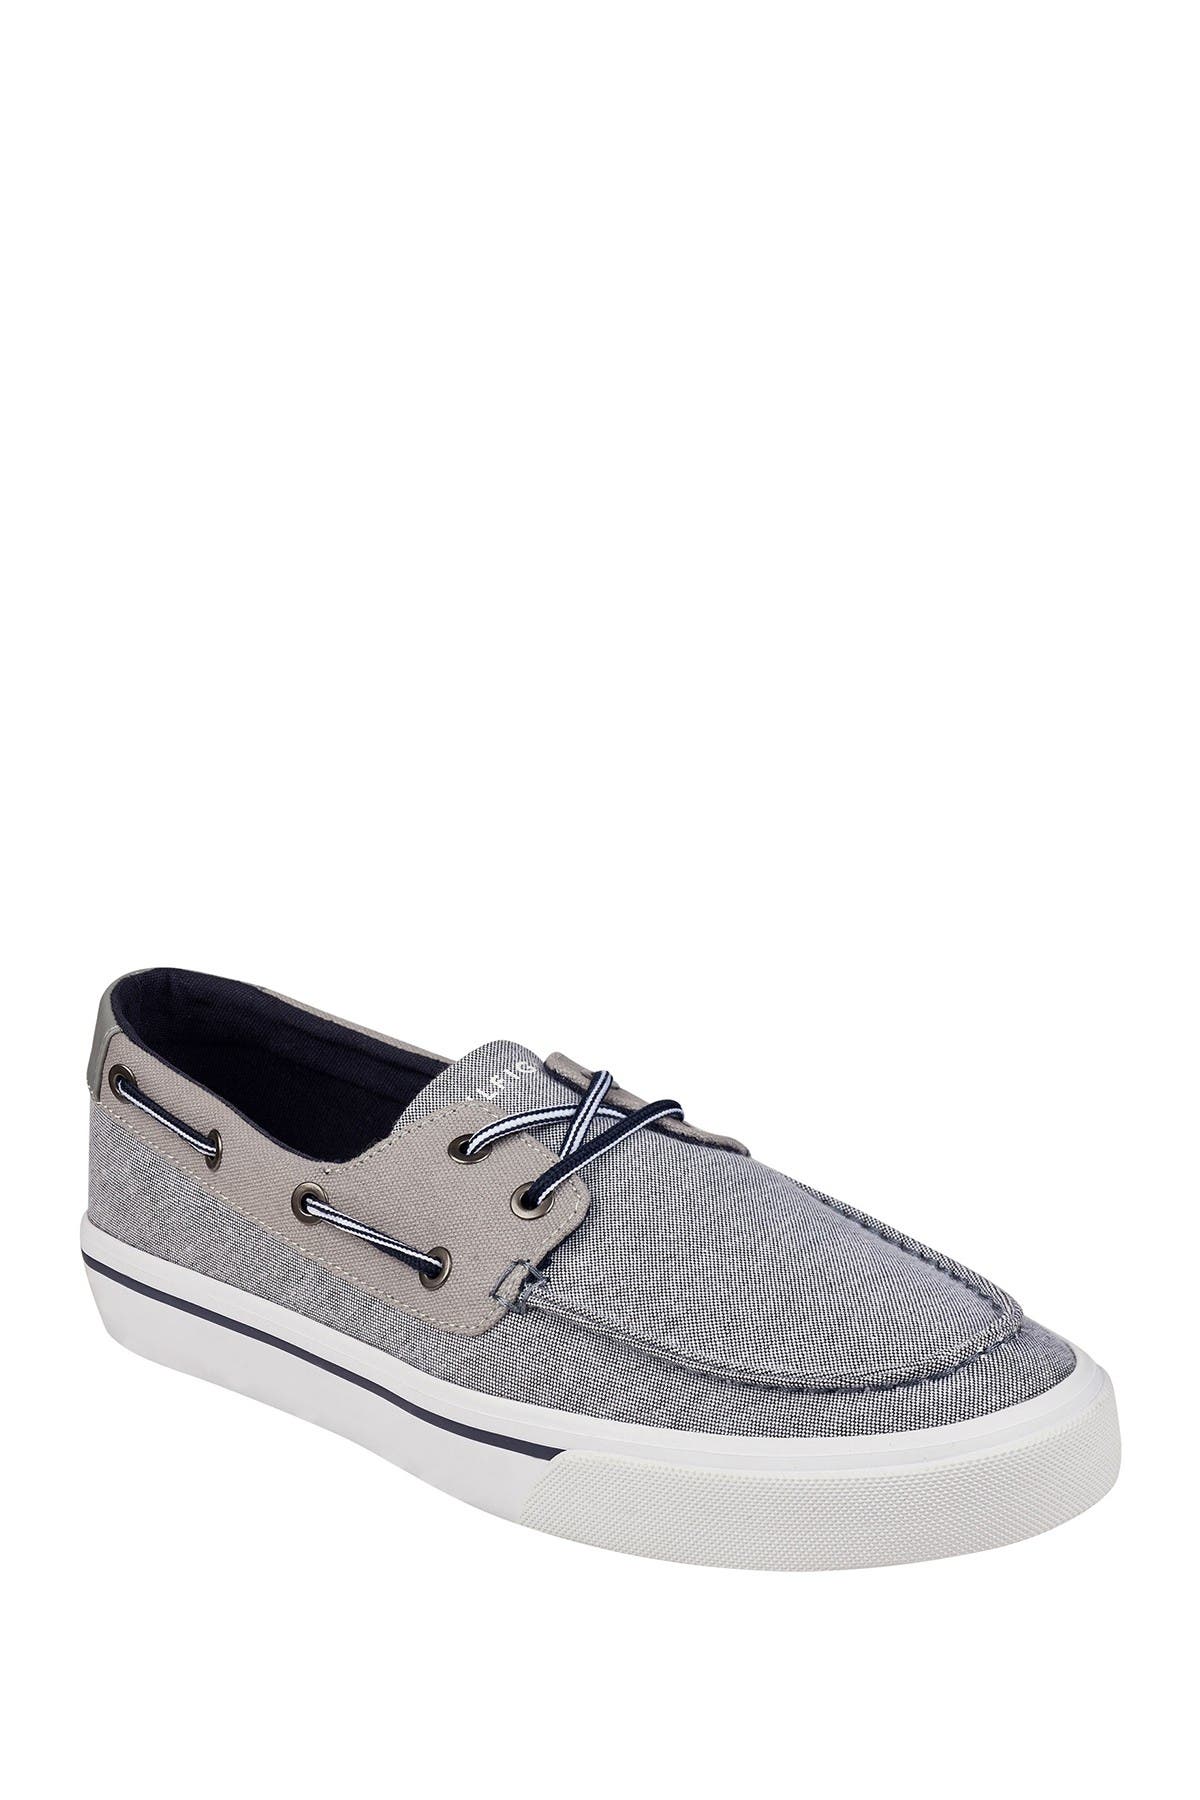 Tommy Hilfiger | Phinx Canvas Boat Shoe 